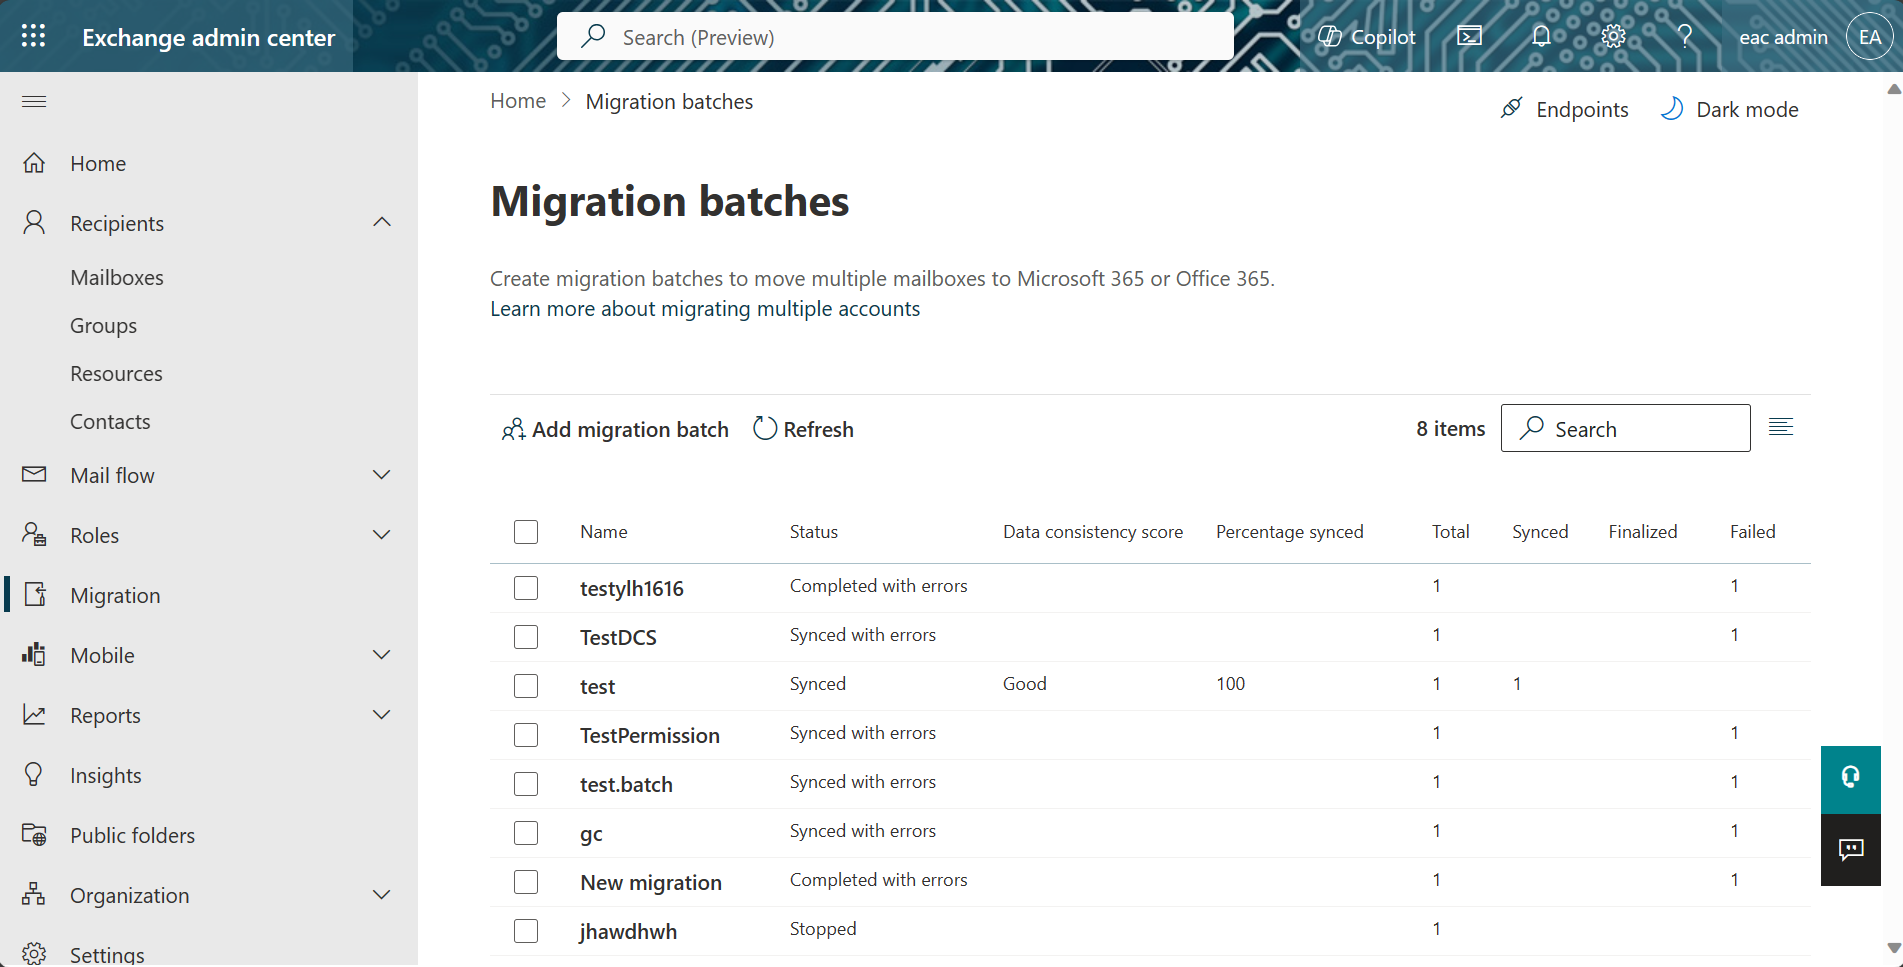 Screenshot of Migration Batches page on Exchange Admin Center.